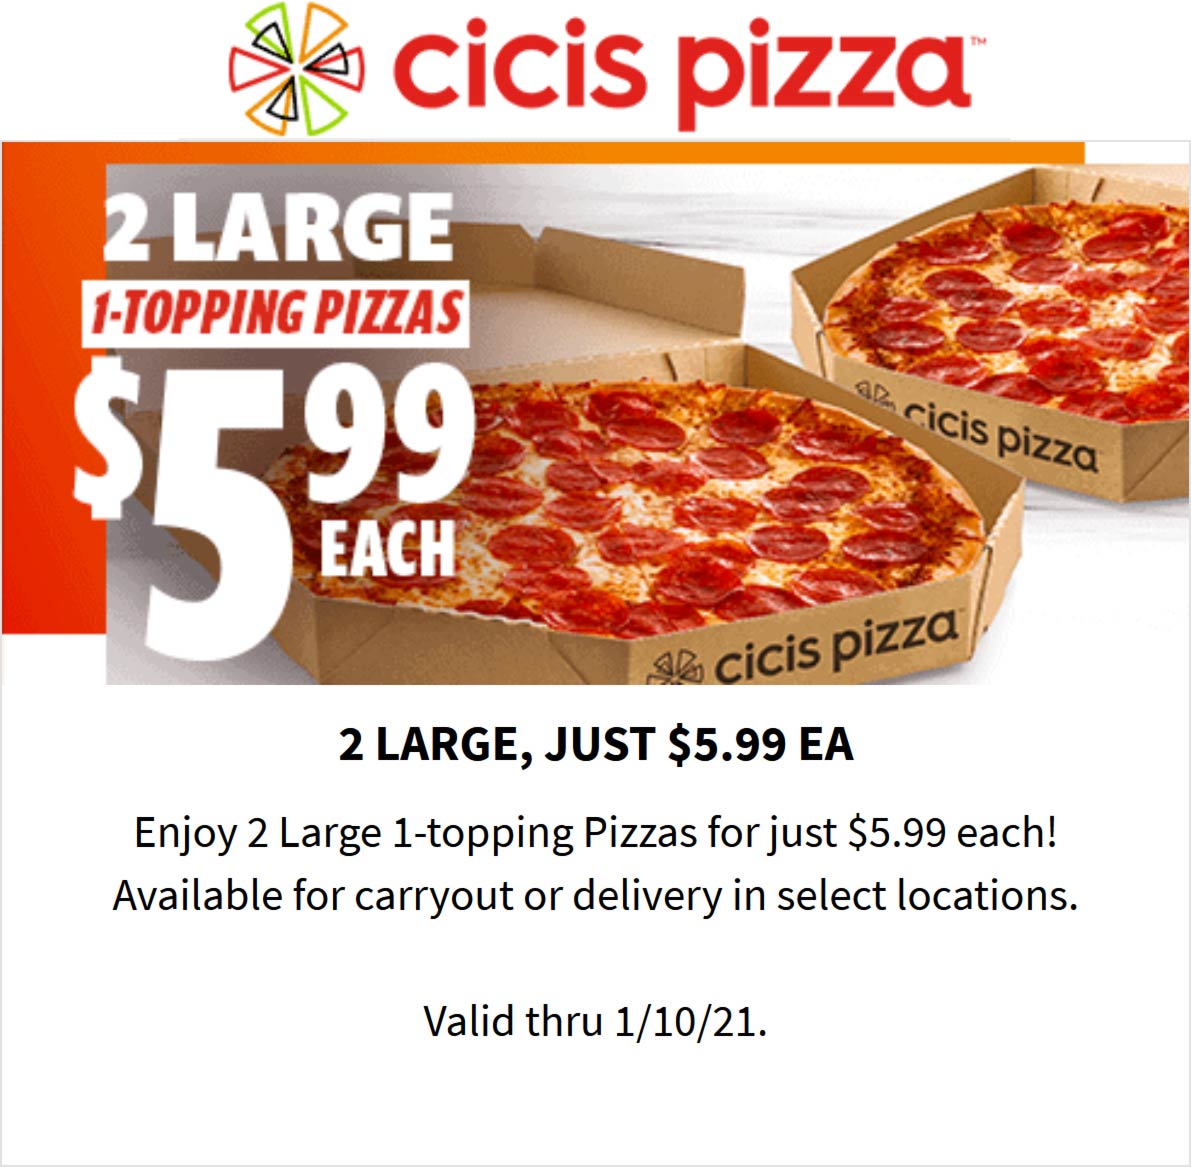 Cicis Pizza restaurants Coupon  2 large 1-topping pizzas = $12 at Cicis Pizza #cicispizza 